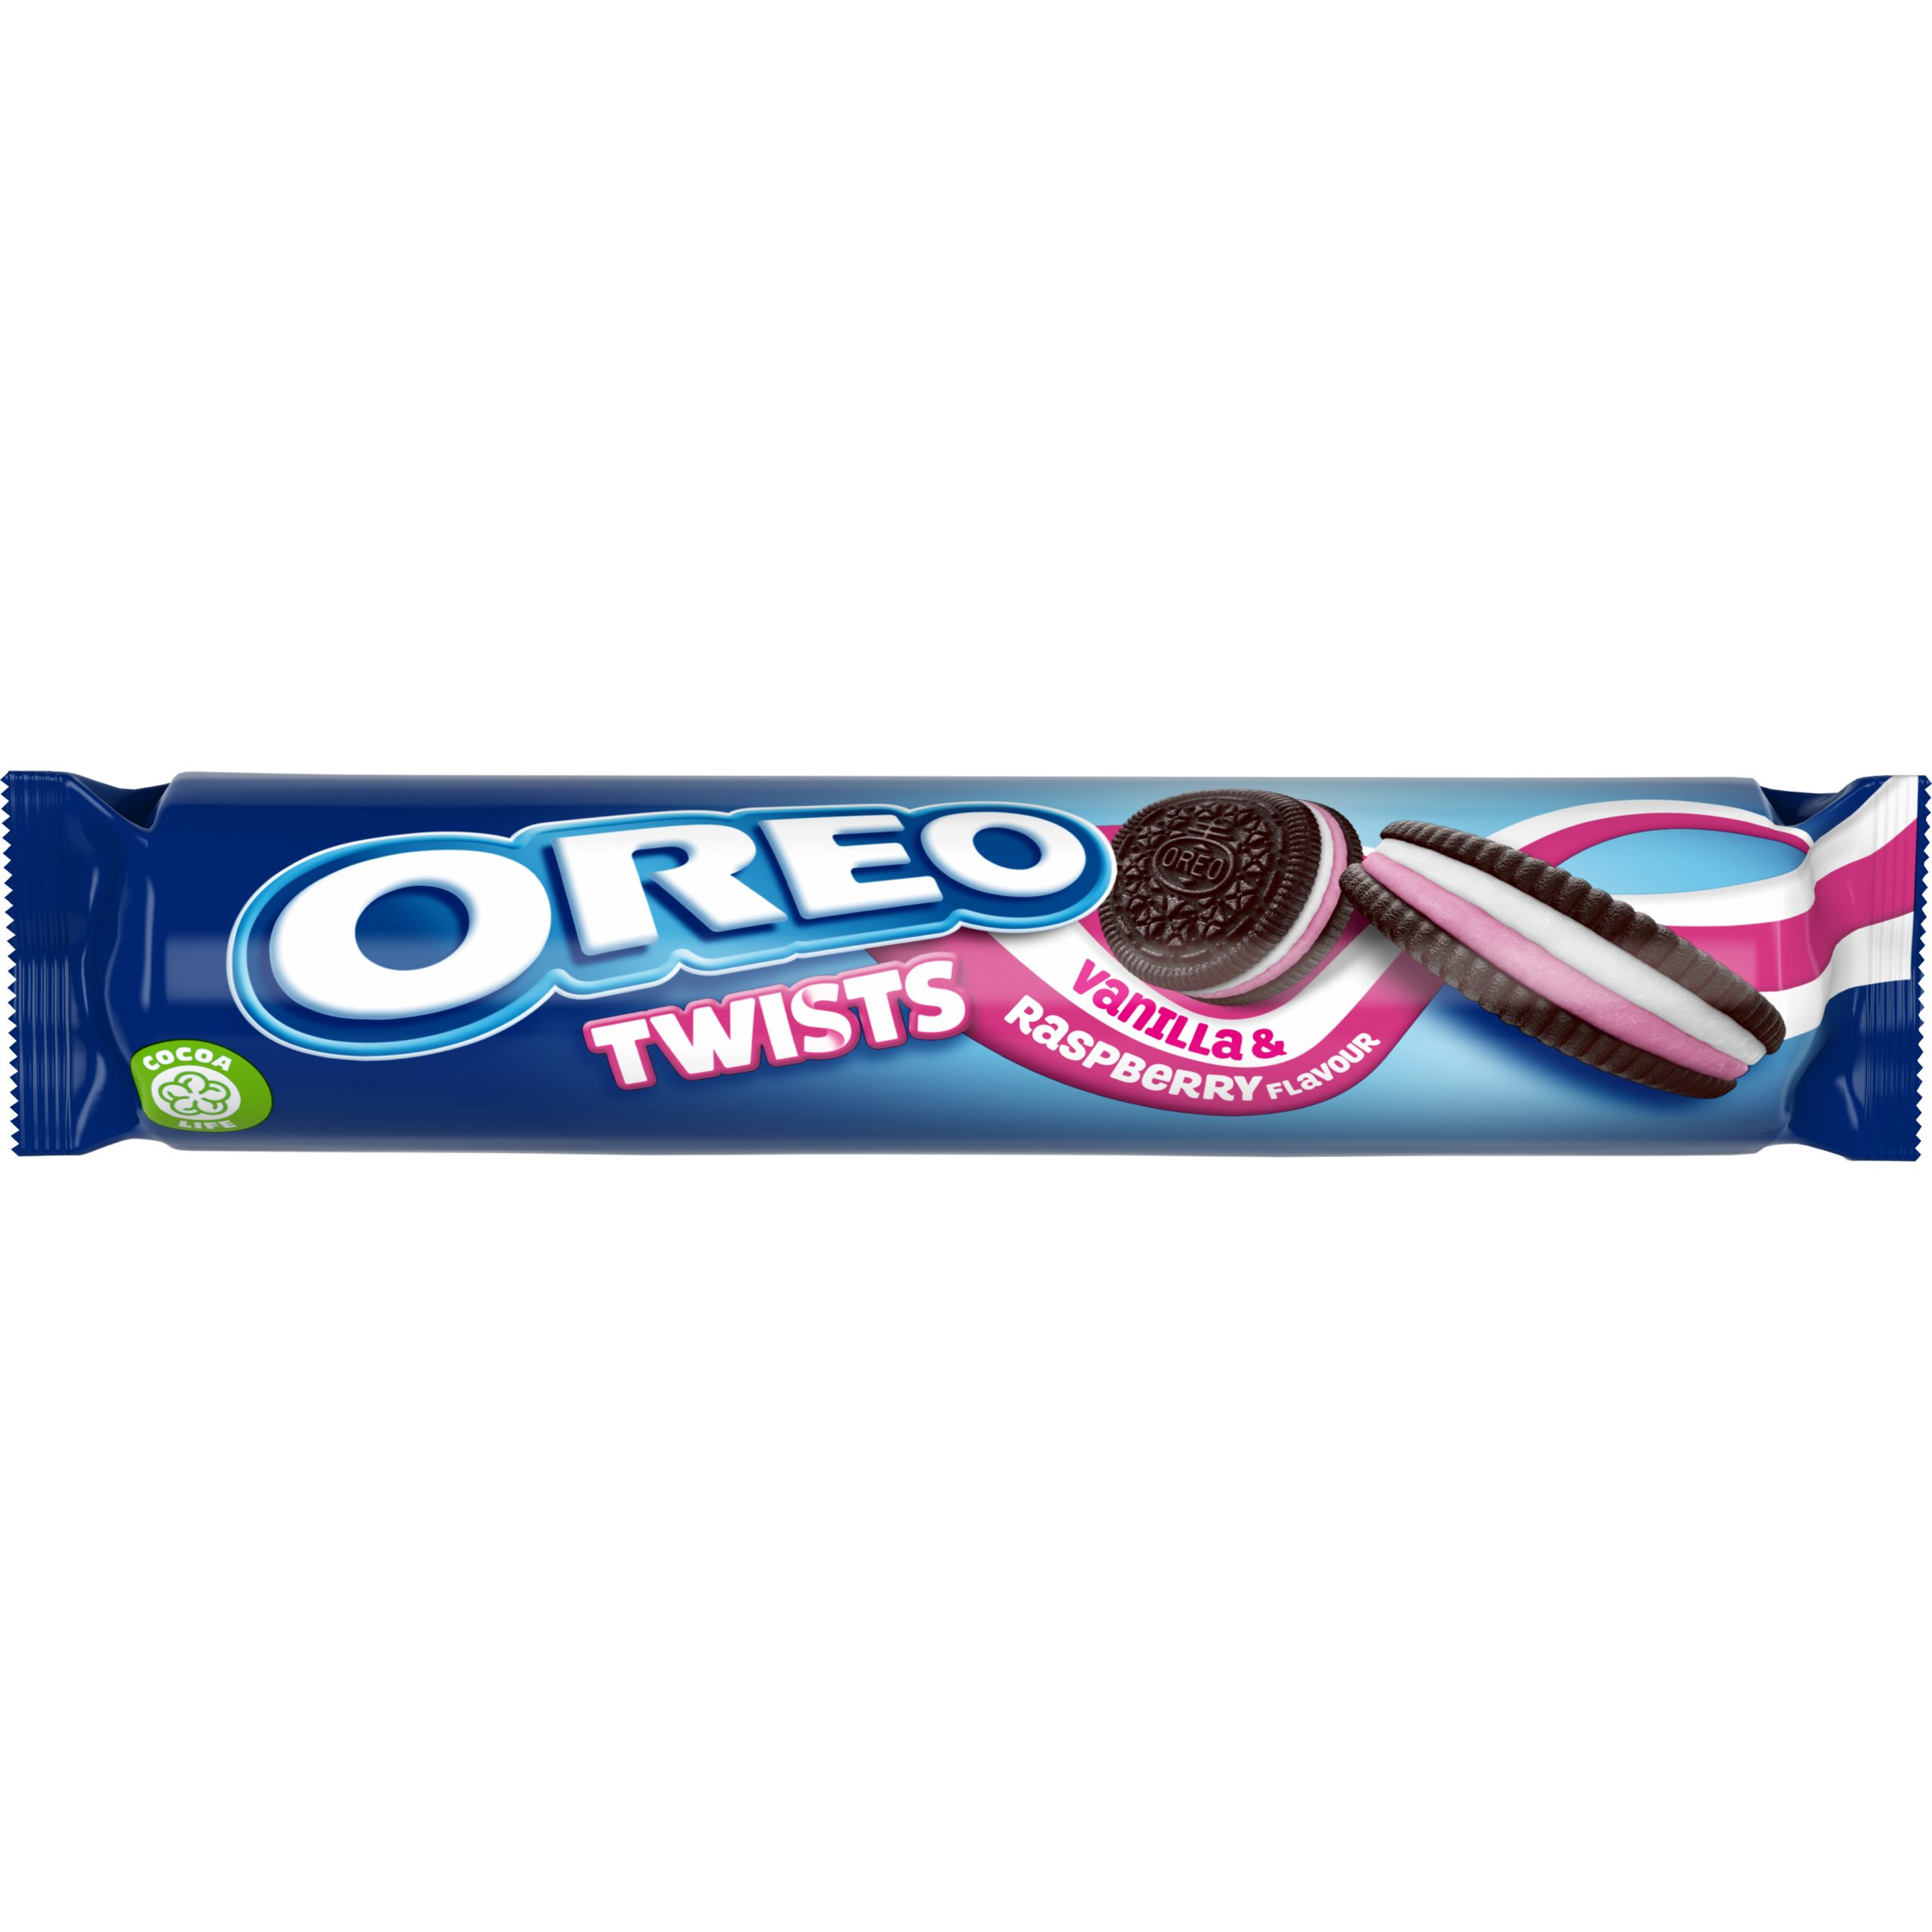 Oreo adds twist to biscuit aisle with two new flavours